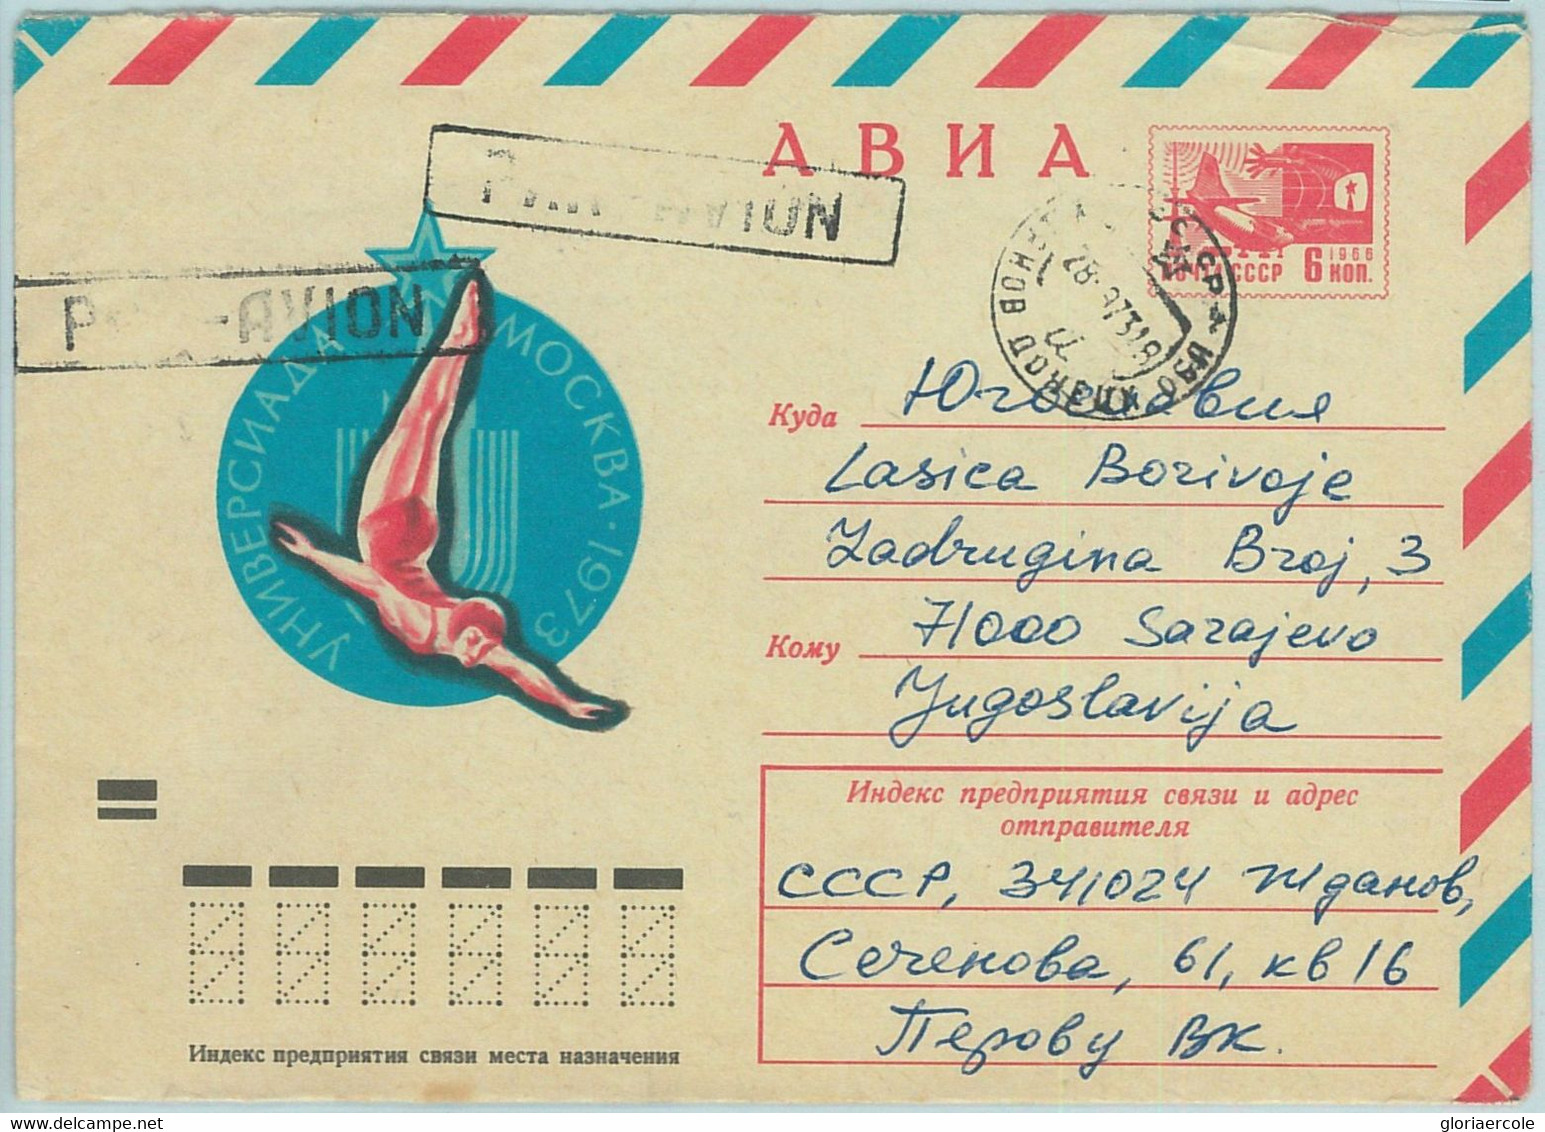 67800 - RUSSIA - POSTAL HISTORY - STATIONERY COVER - 1973, Universiade Games, Diving - Duiken